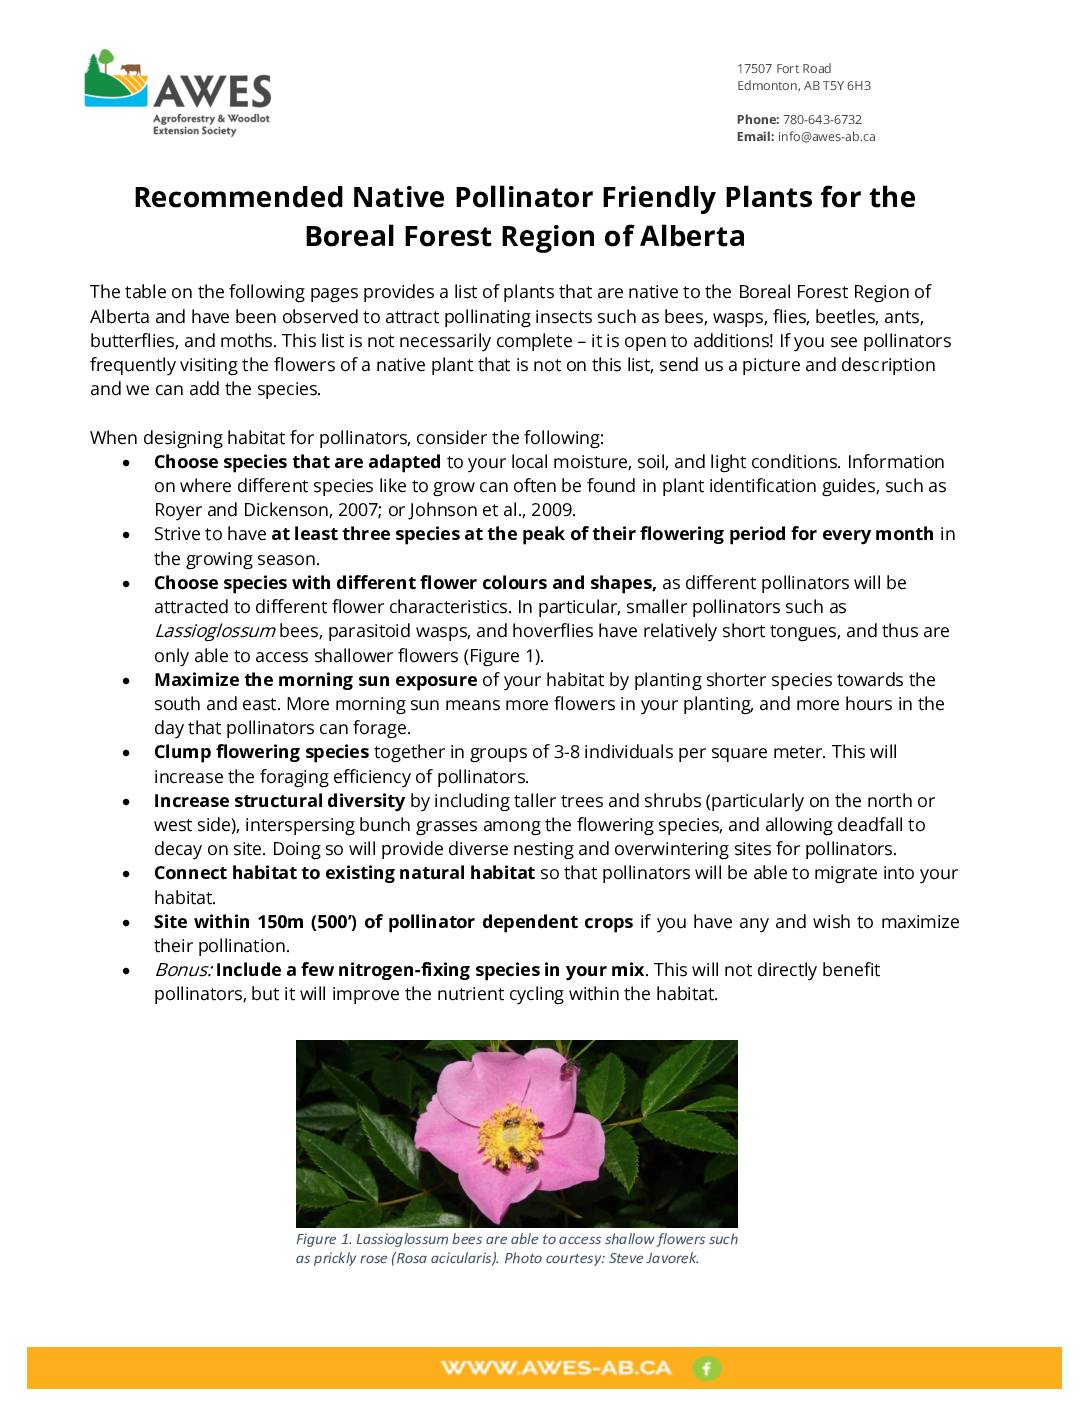 Recommended Native Pollinator Friendly Plants for the Boreal Forest Region of Alberta